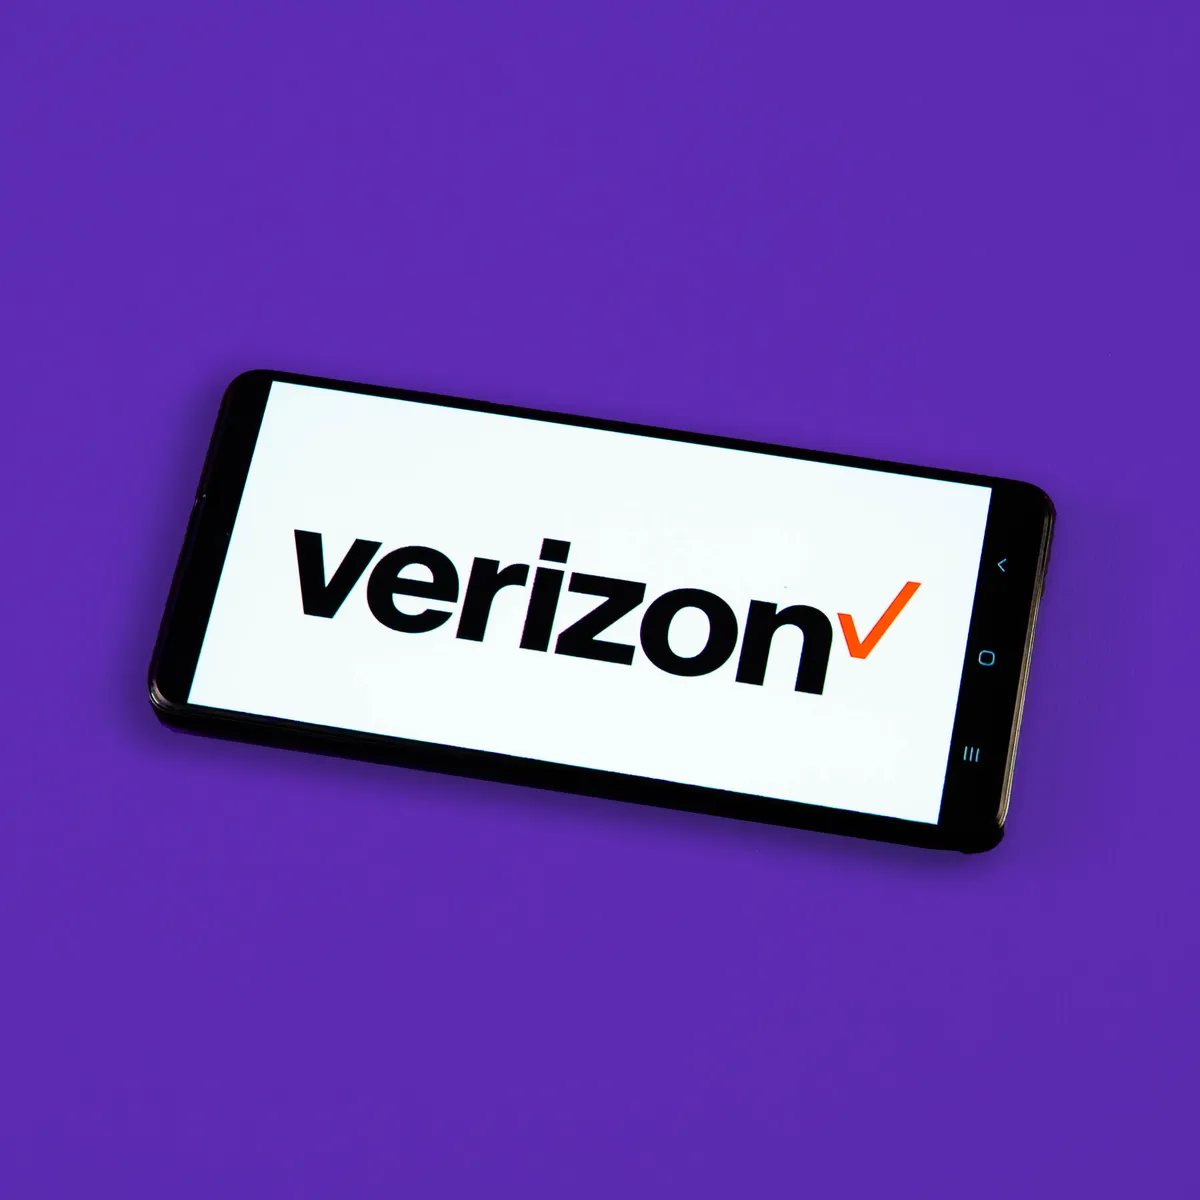 Big Changes Ahead How Verizon’s Latest Smartwatch Plan Price Increase Affects Your Wallet and Connectivity Options--